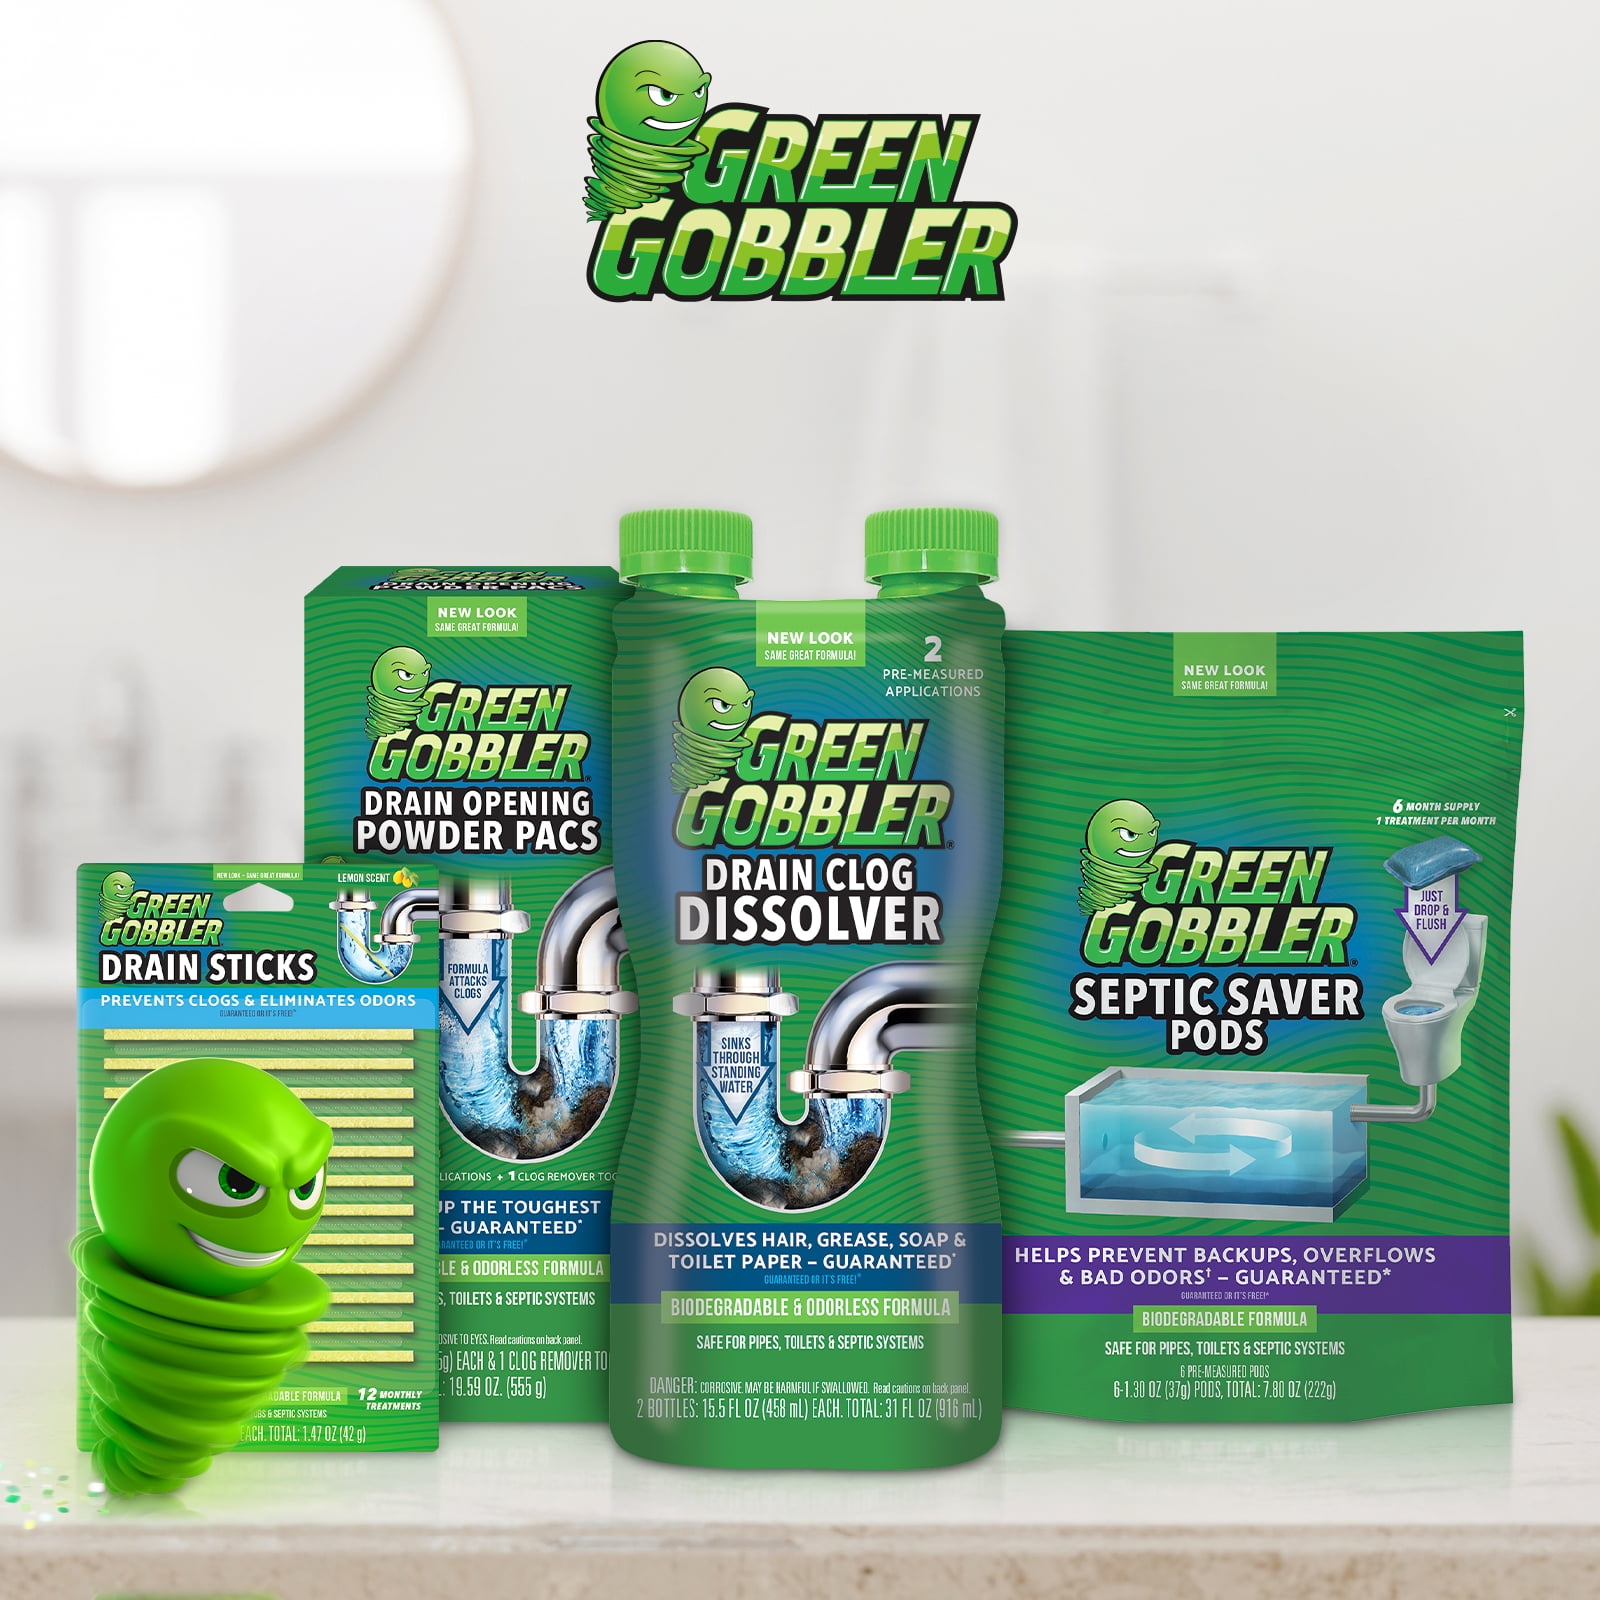 BwcDeals - 33% Off!! (Ladies, get this for your shower drains!!!!!) Green  Gobbler Ultimate Main Drain Opener + Drain Cleaner + Hair Clog Remover - 64  oz  #BwcDeals #Deals #dailydeals #DealsAndSteals  #clearthelists